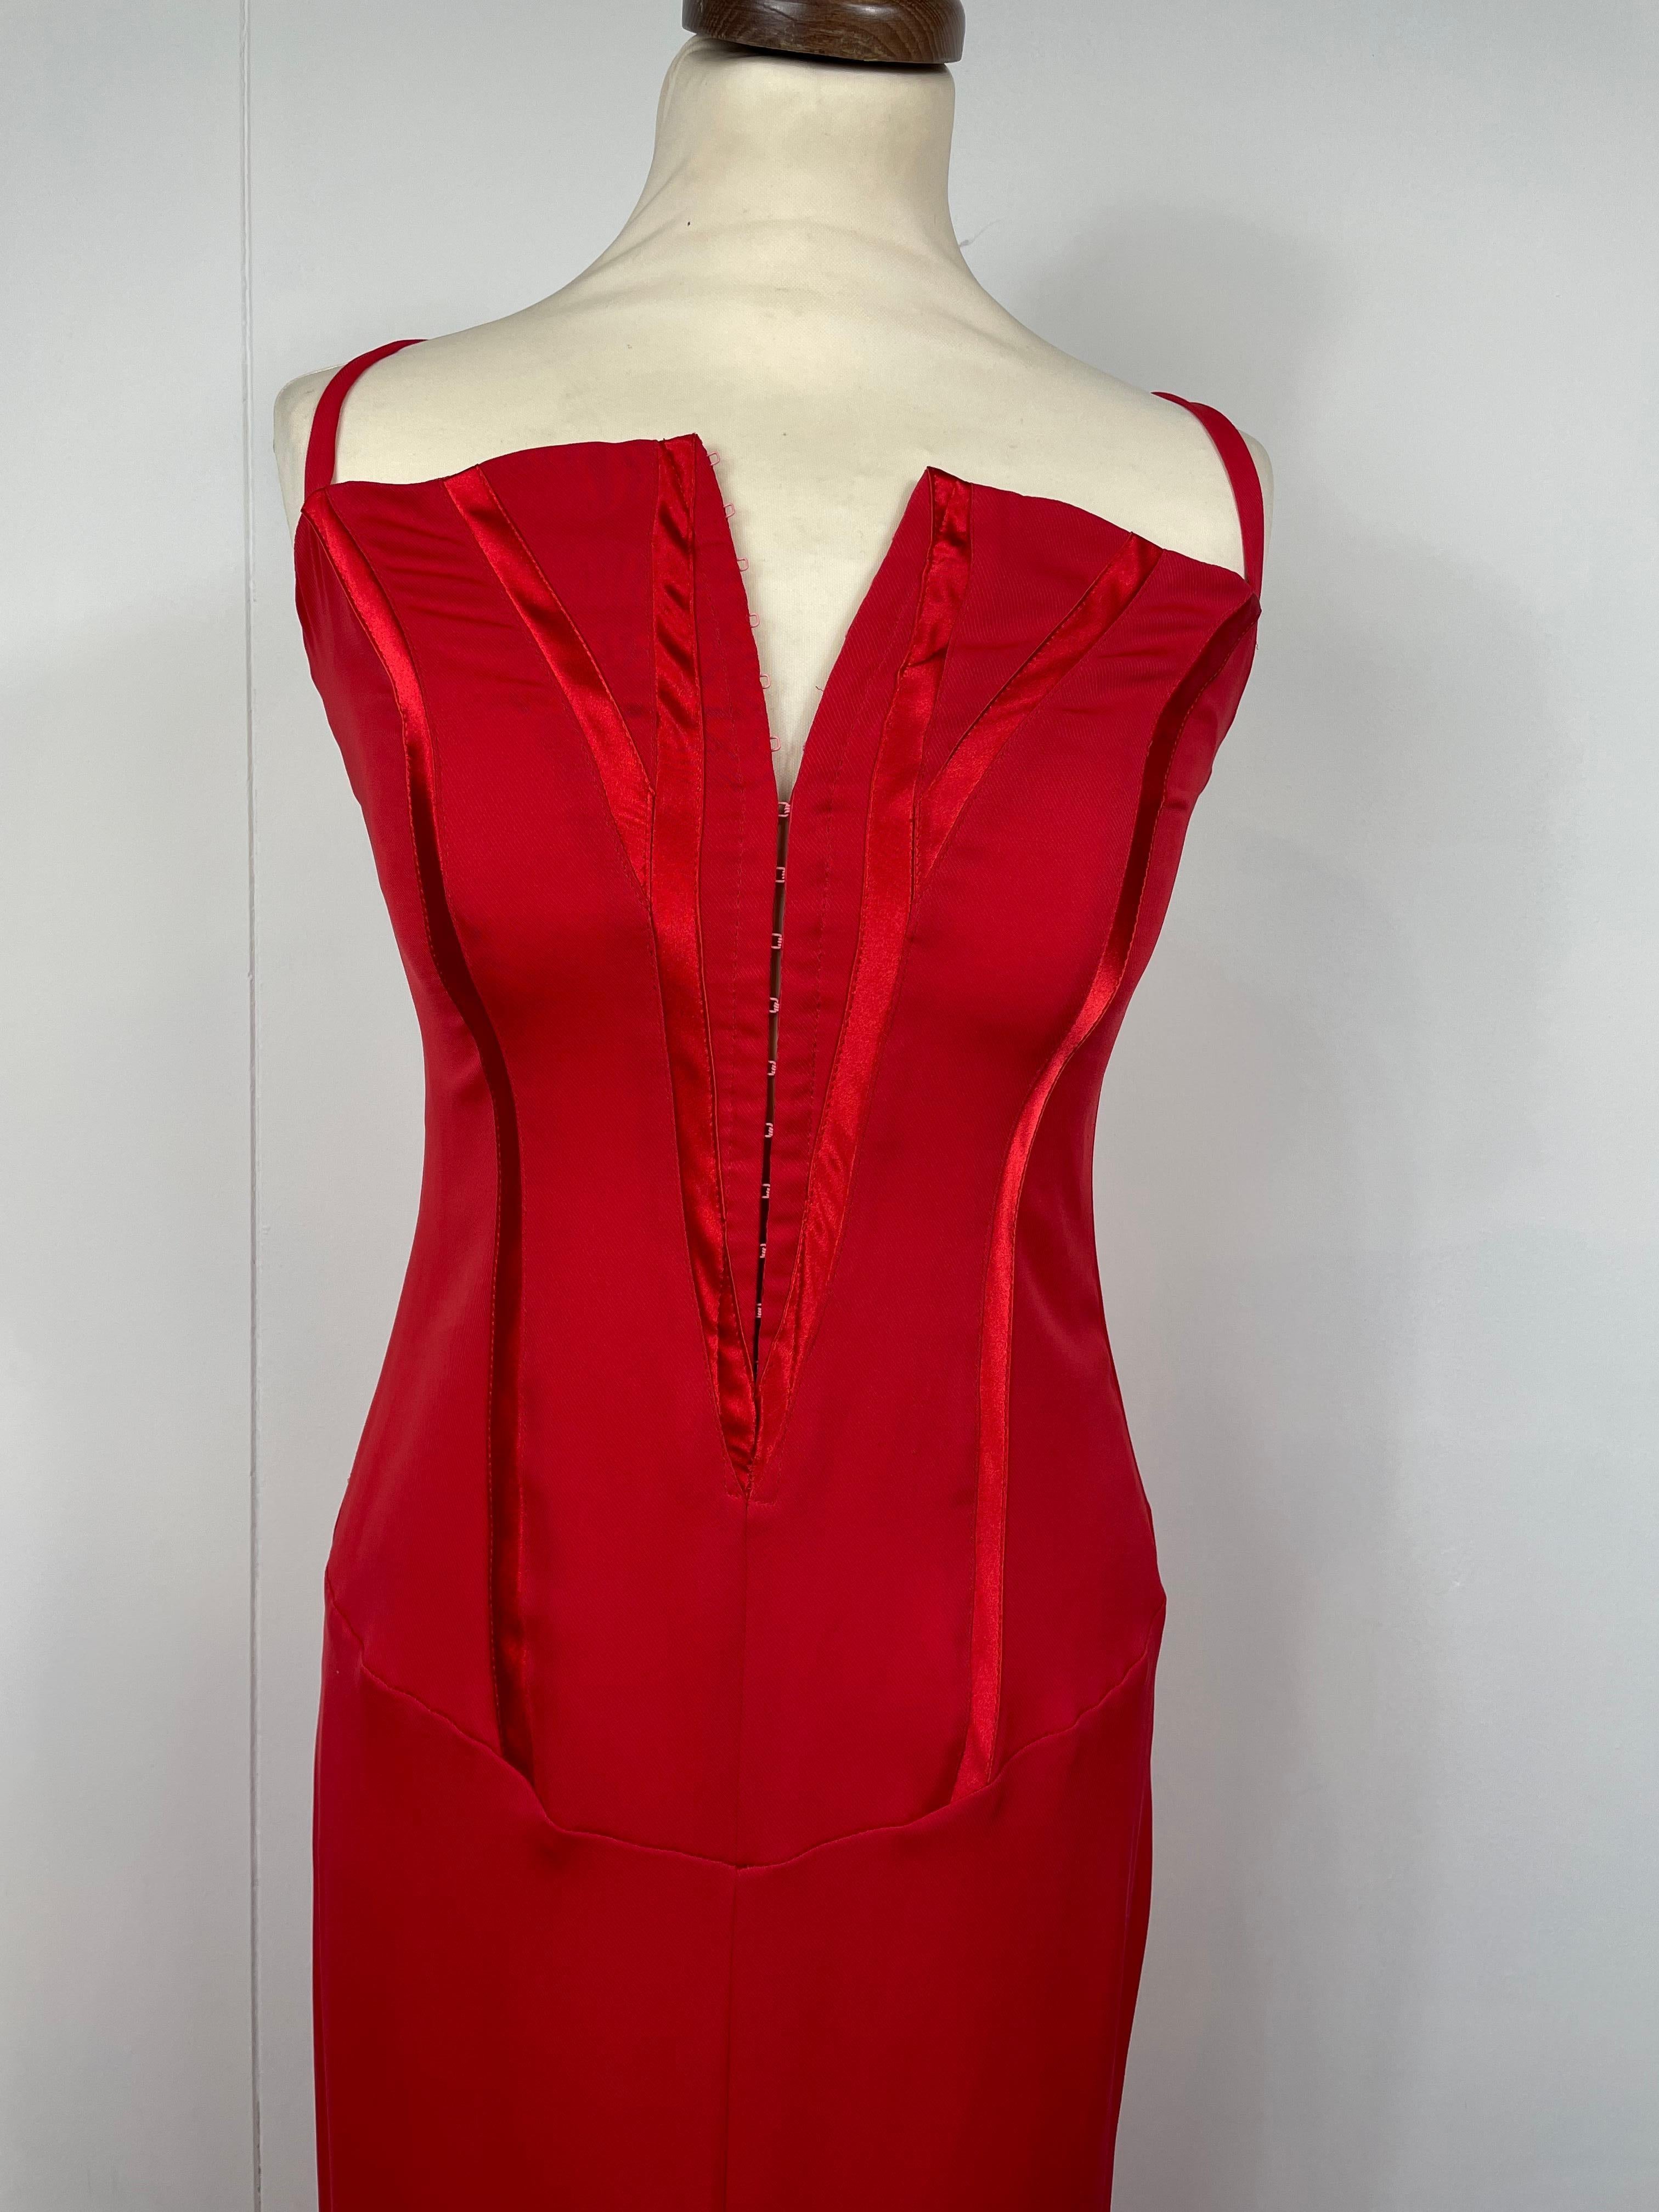 Versace, Jeans Couture dress. About 90s.
Iconic piece. Very similar to the one worn by Lady Gaga at the premiere of the house of Gucci, in Milan.
In red polyester.
Featuring a frontal closure.
Size 40 Italian.
Measurements:
Bust 40 cm
Waist 42